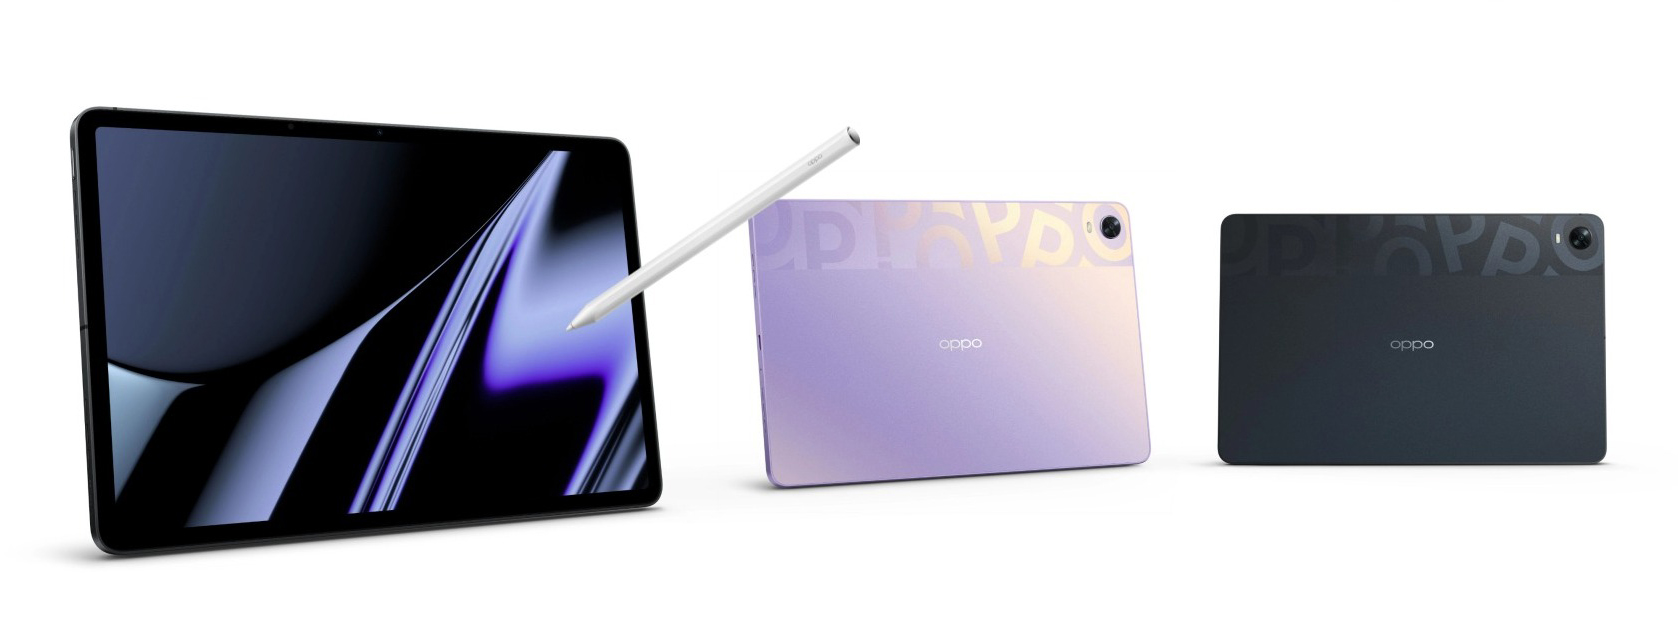 oppo pad tablet launches in China